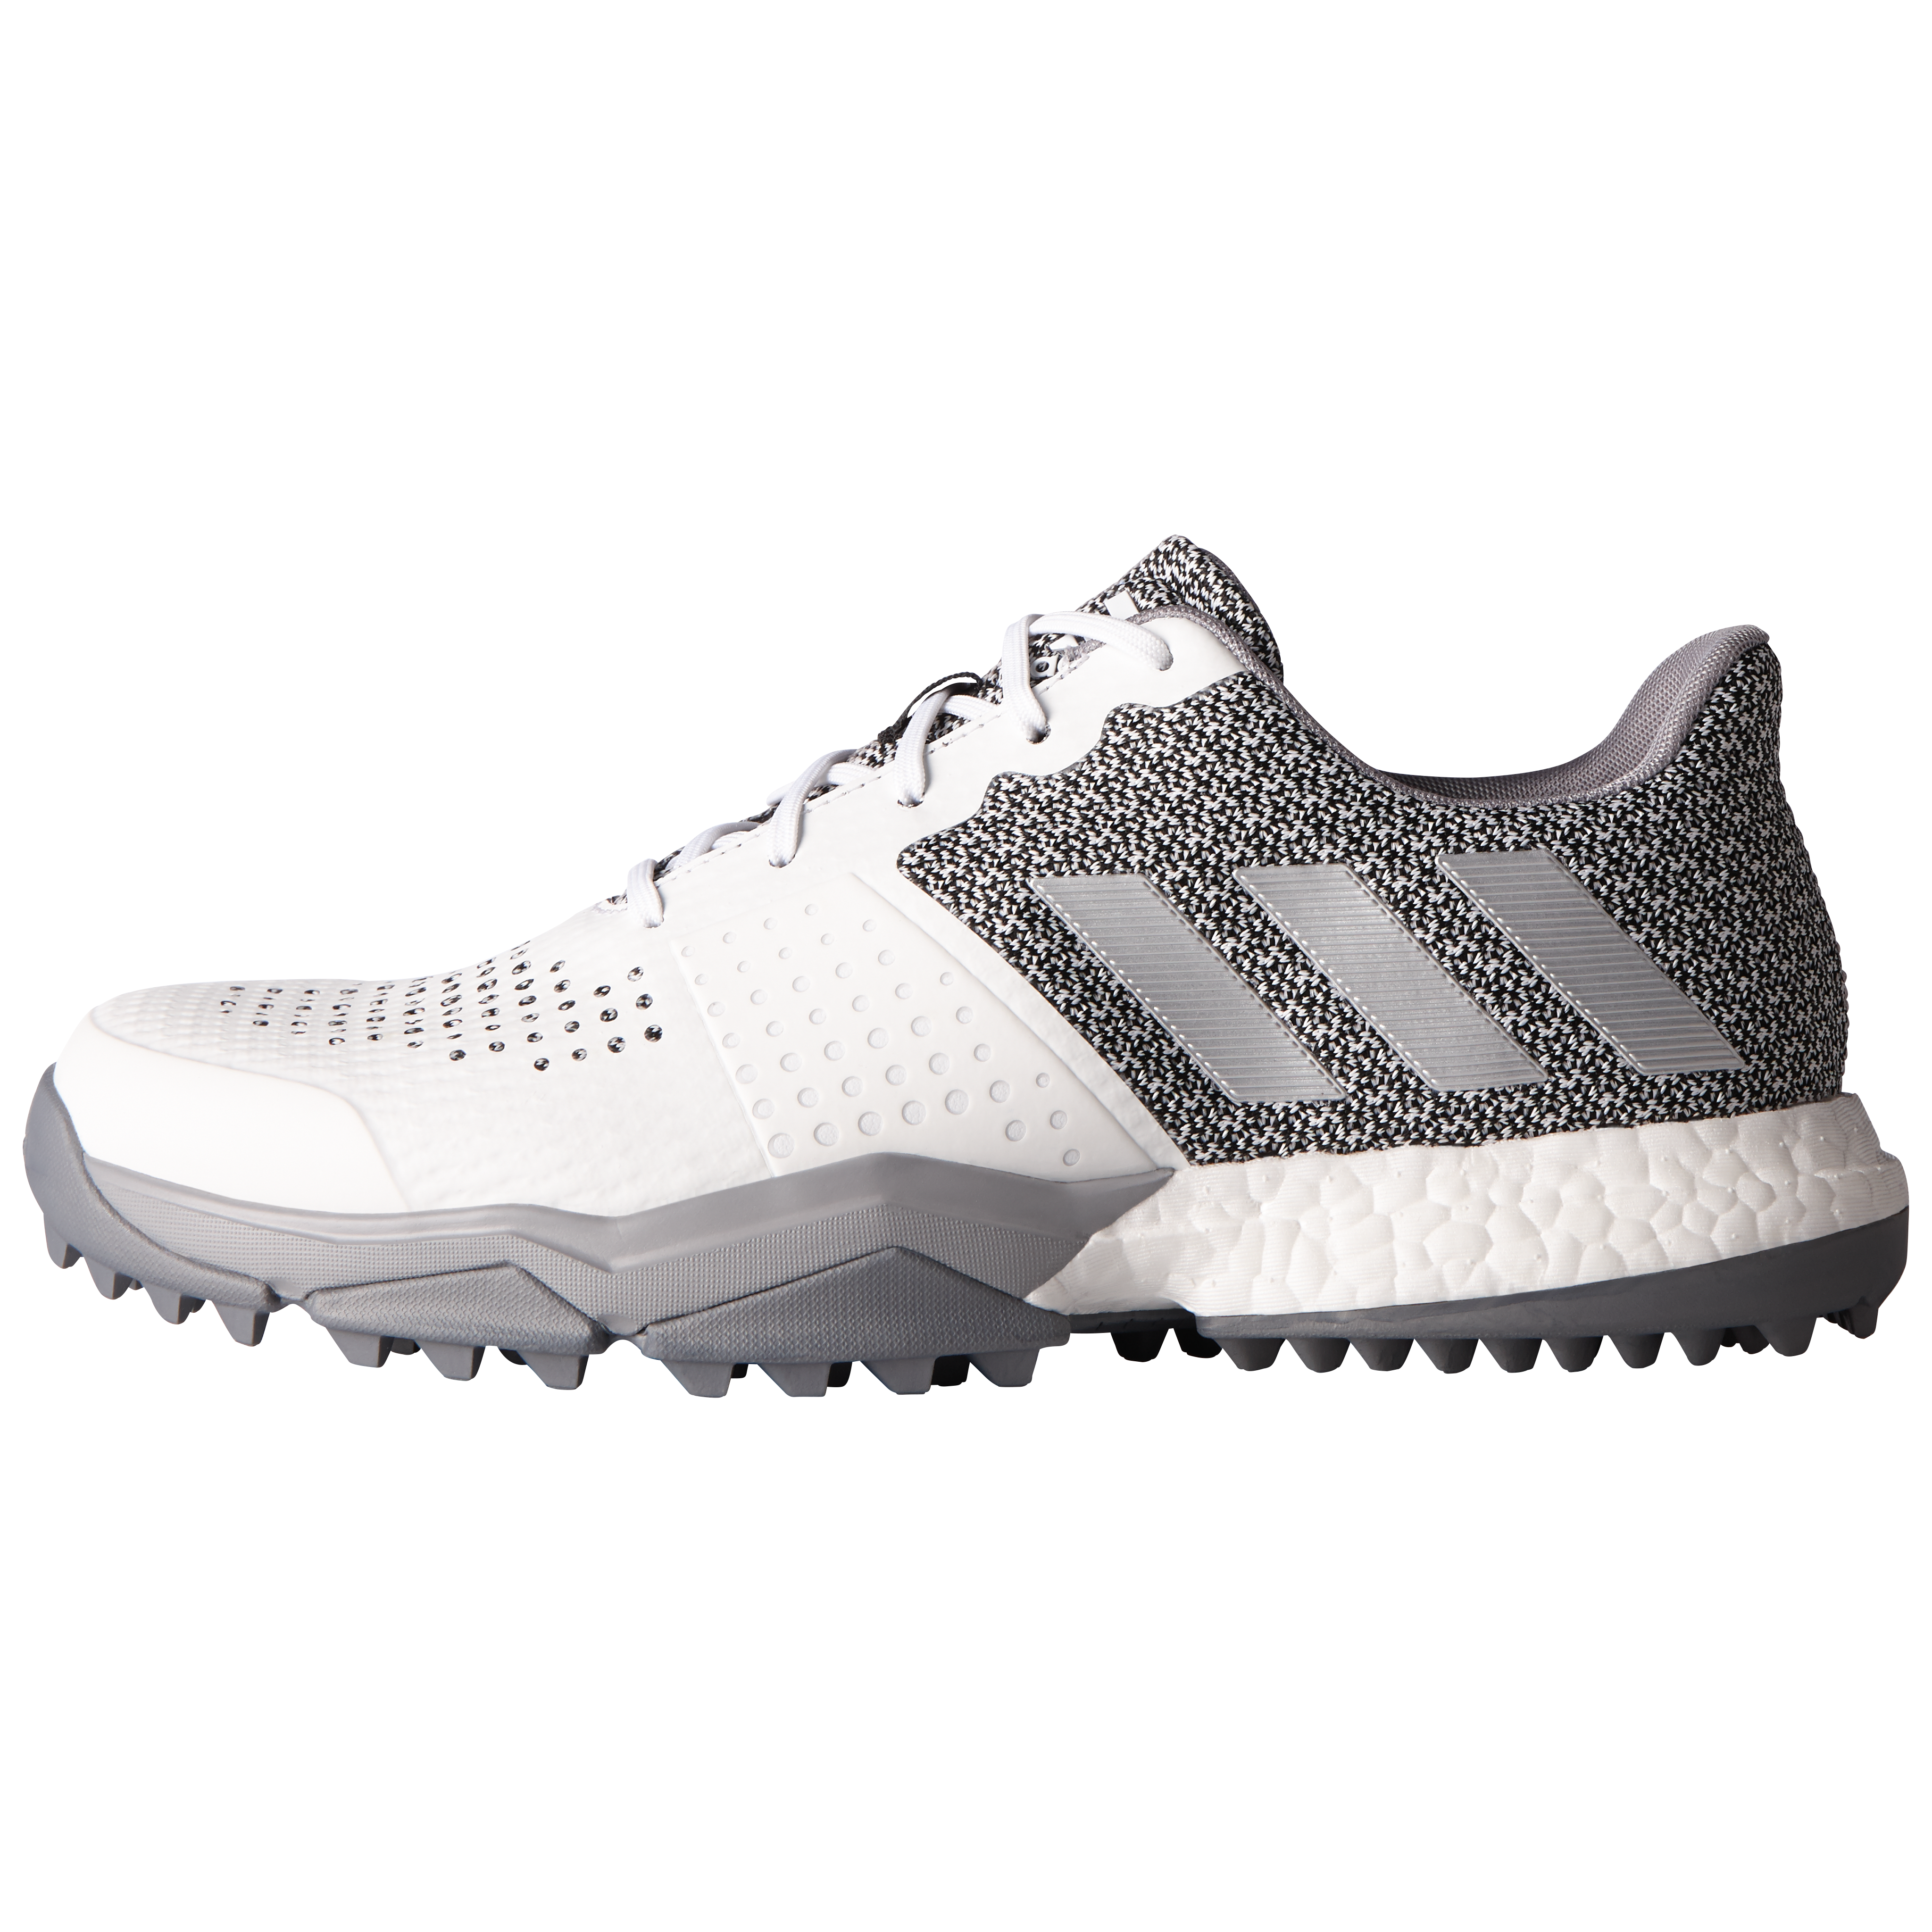 adidas boost 3 golf shoes